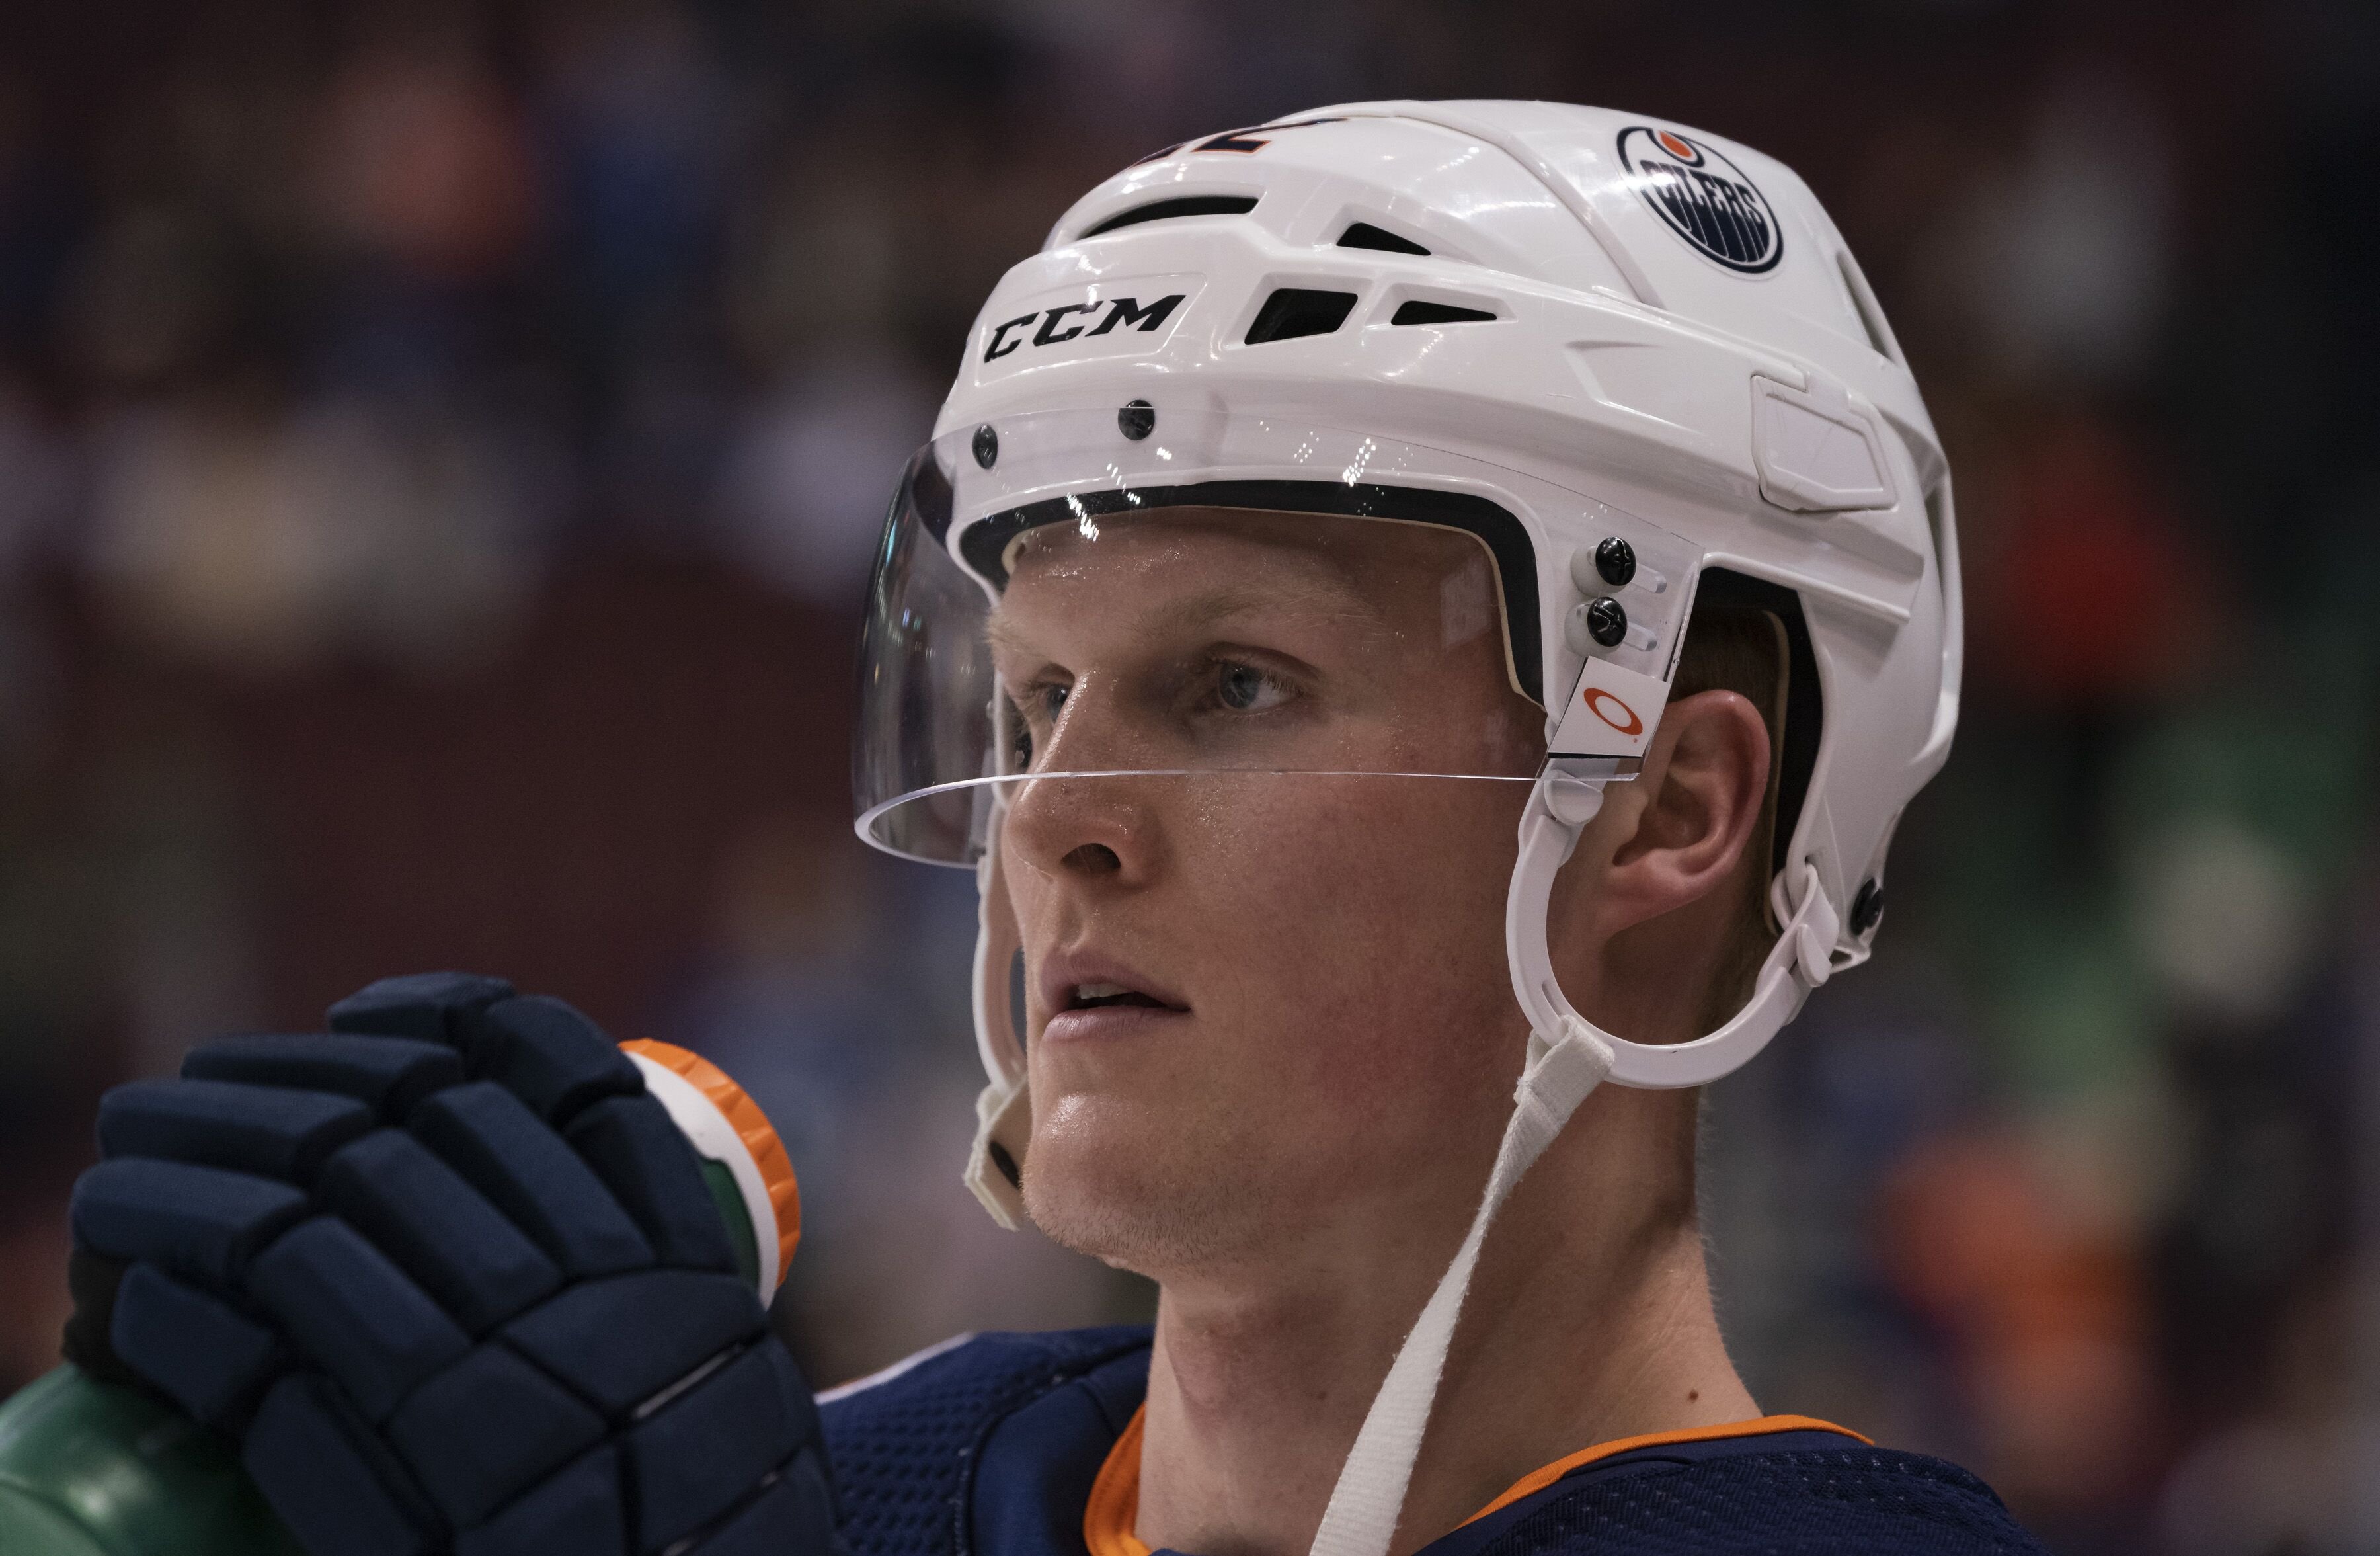 Colby Cave #12 of the Edmonton Oilers during the pre-game warm up prior to in NHL action against the Vancouver Canucks on January, 16, 2019 | Photo: Getty Images